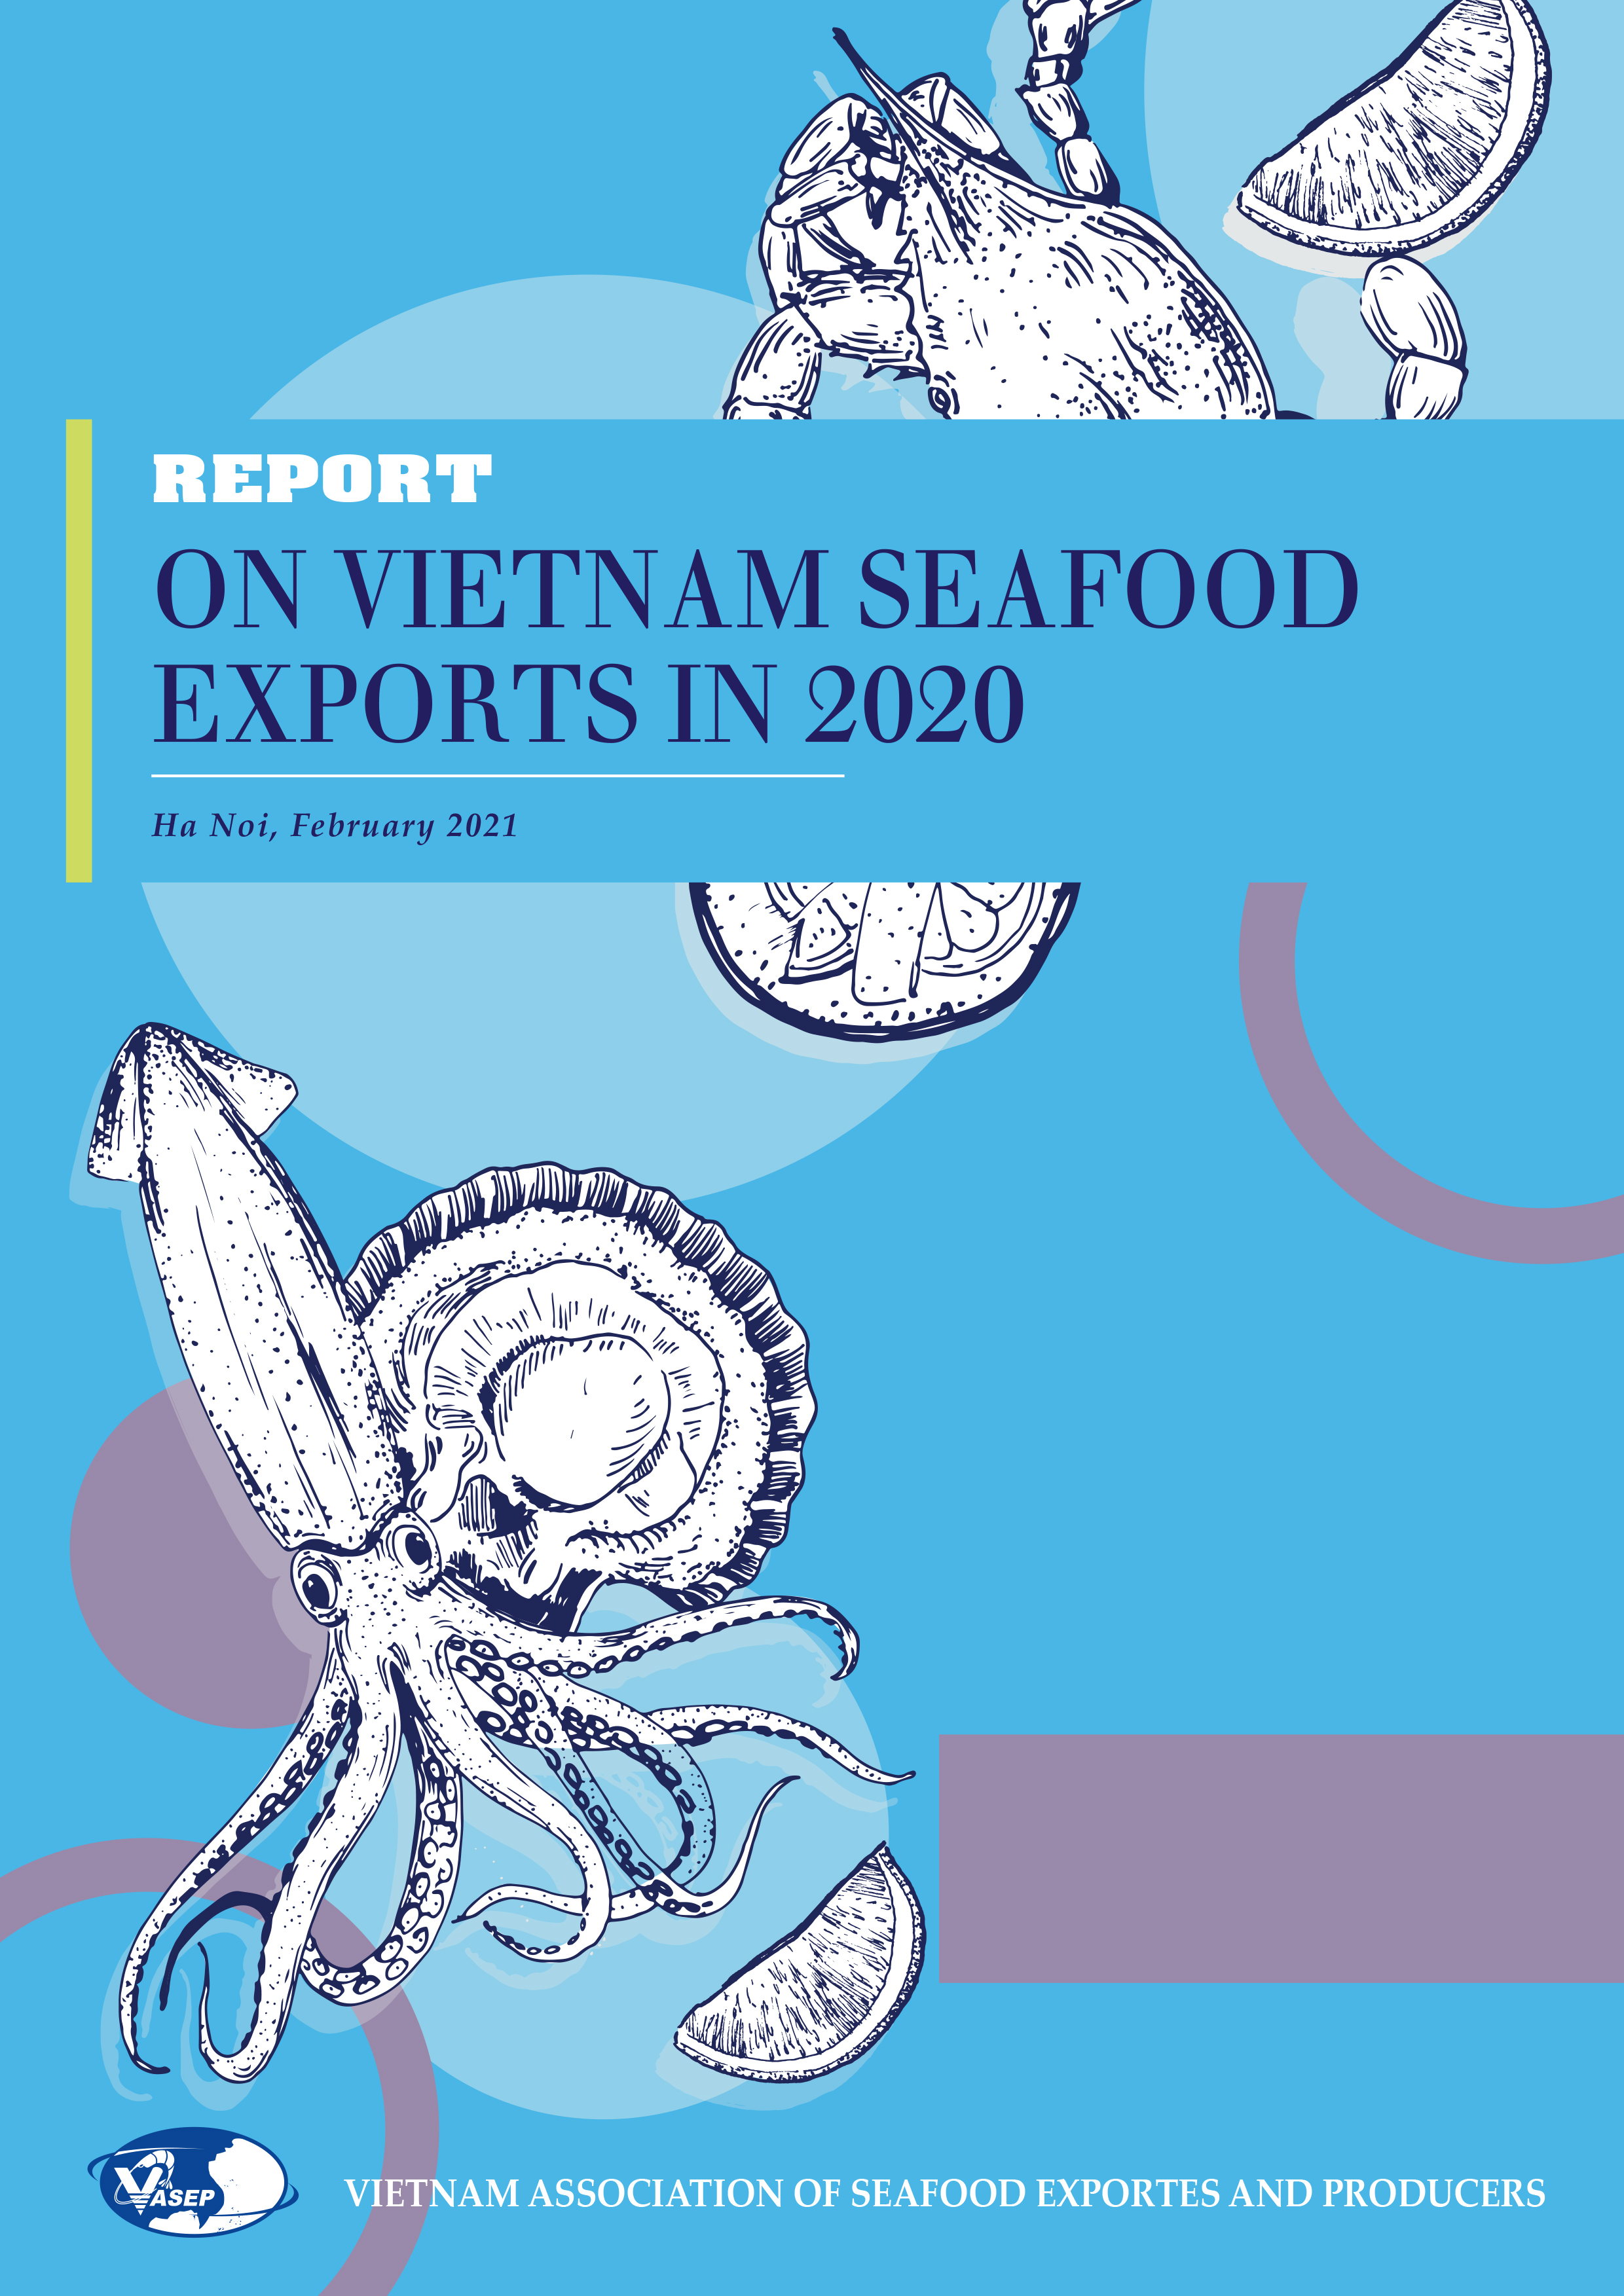 REPORT ON VIETNAM SEAFOOD EXPORTS IN 2020